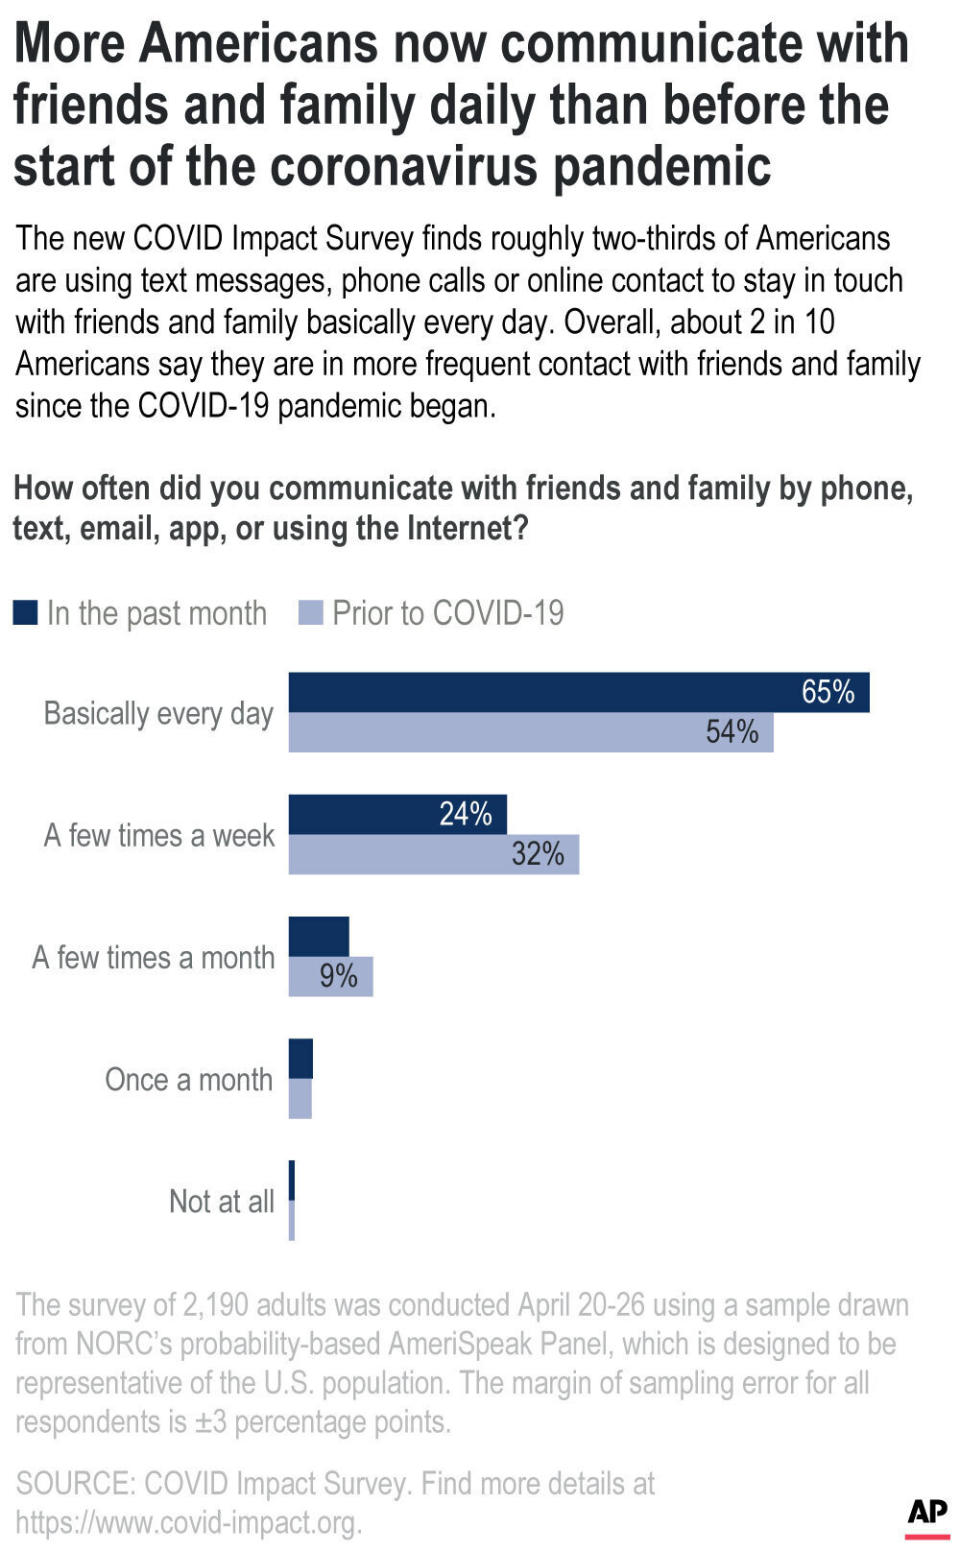 The new COVID Impact Survey finds roughly two-thirds of Americans are using text messages, phone calls or online contact to stay in touch with friends and family basically every day. Overall, about 2 in 10 Americans say they are in more frequent contact with friends and family since the COVID-19 pandemic began.;